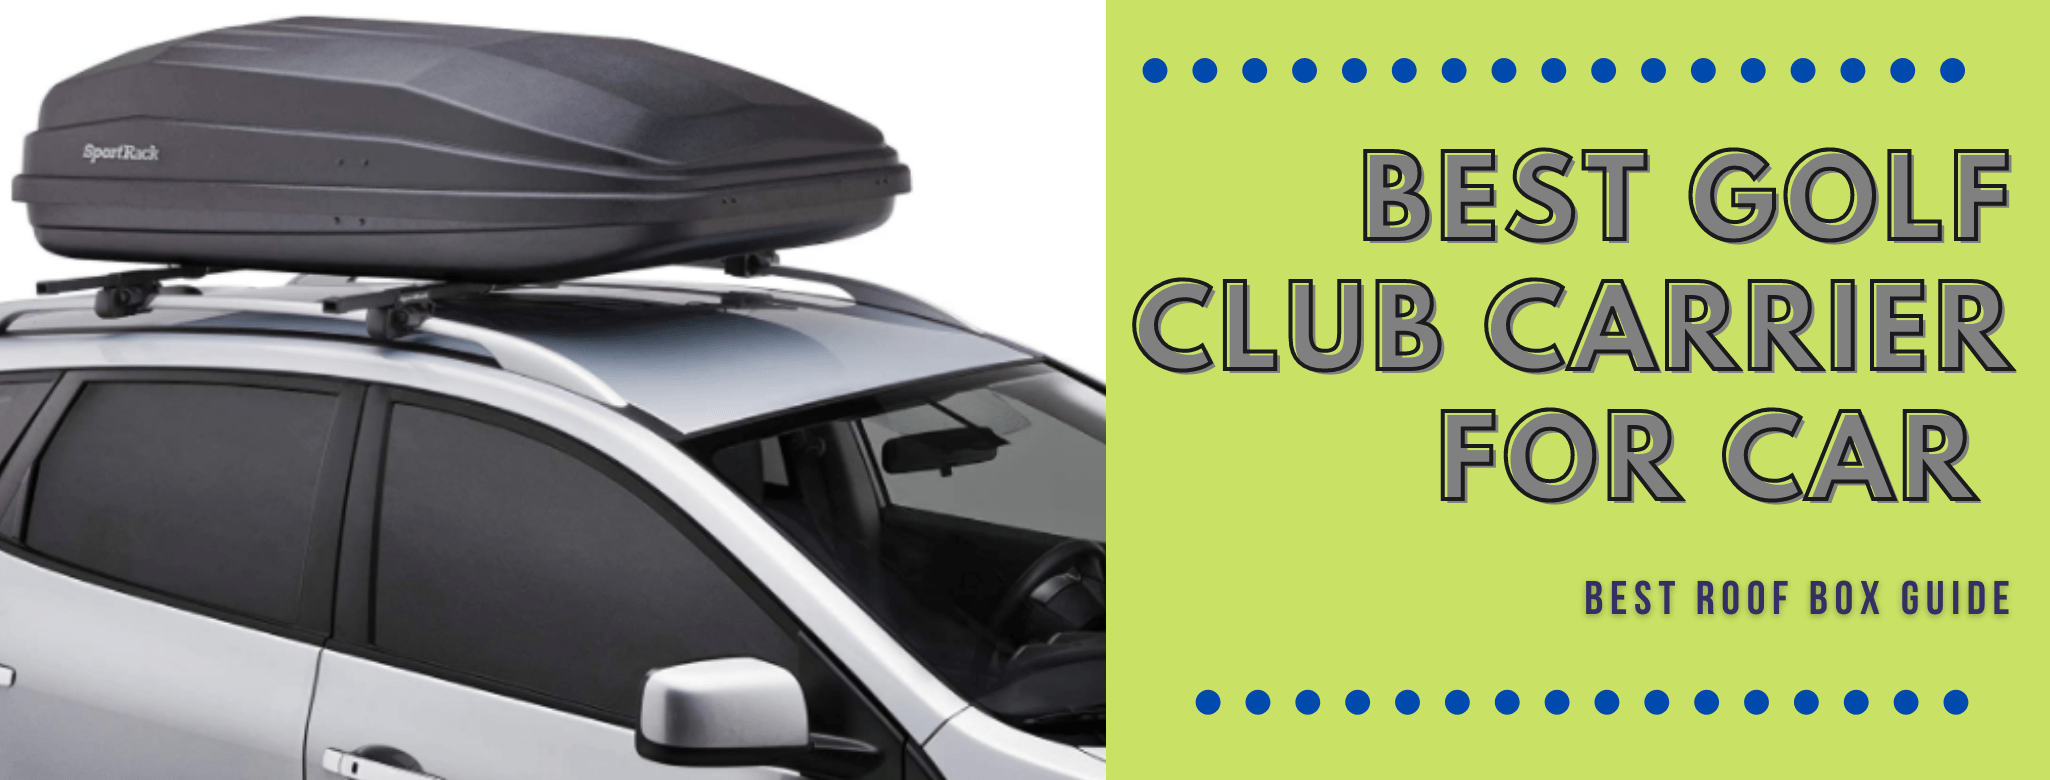 👉 Top 6 Acura MDX Roof Box – Buying Guides And Reviews 🚘